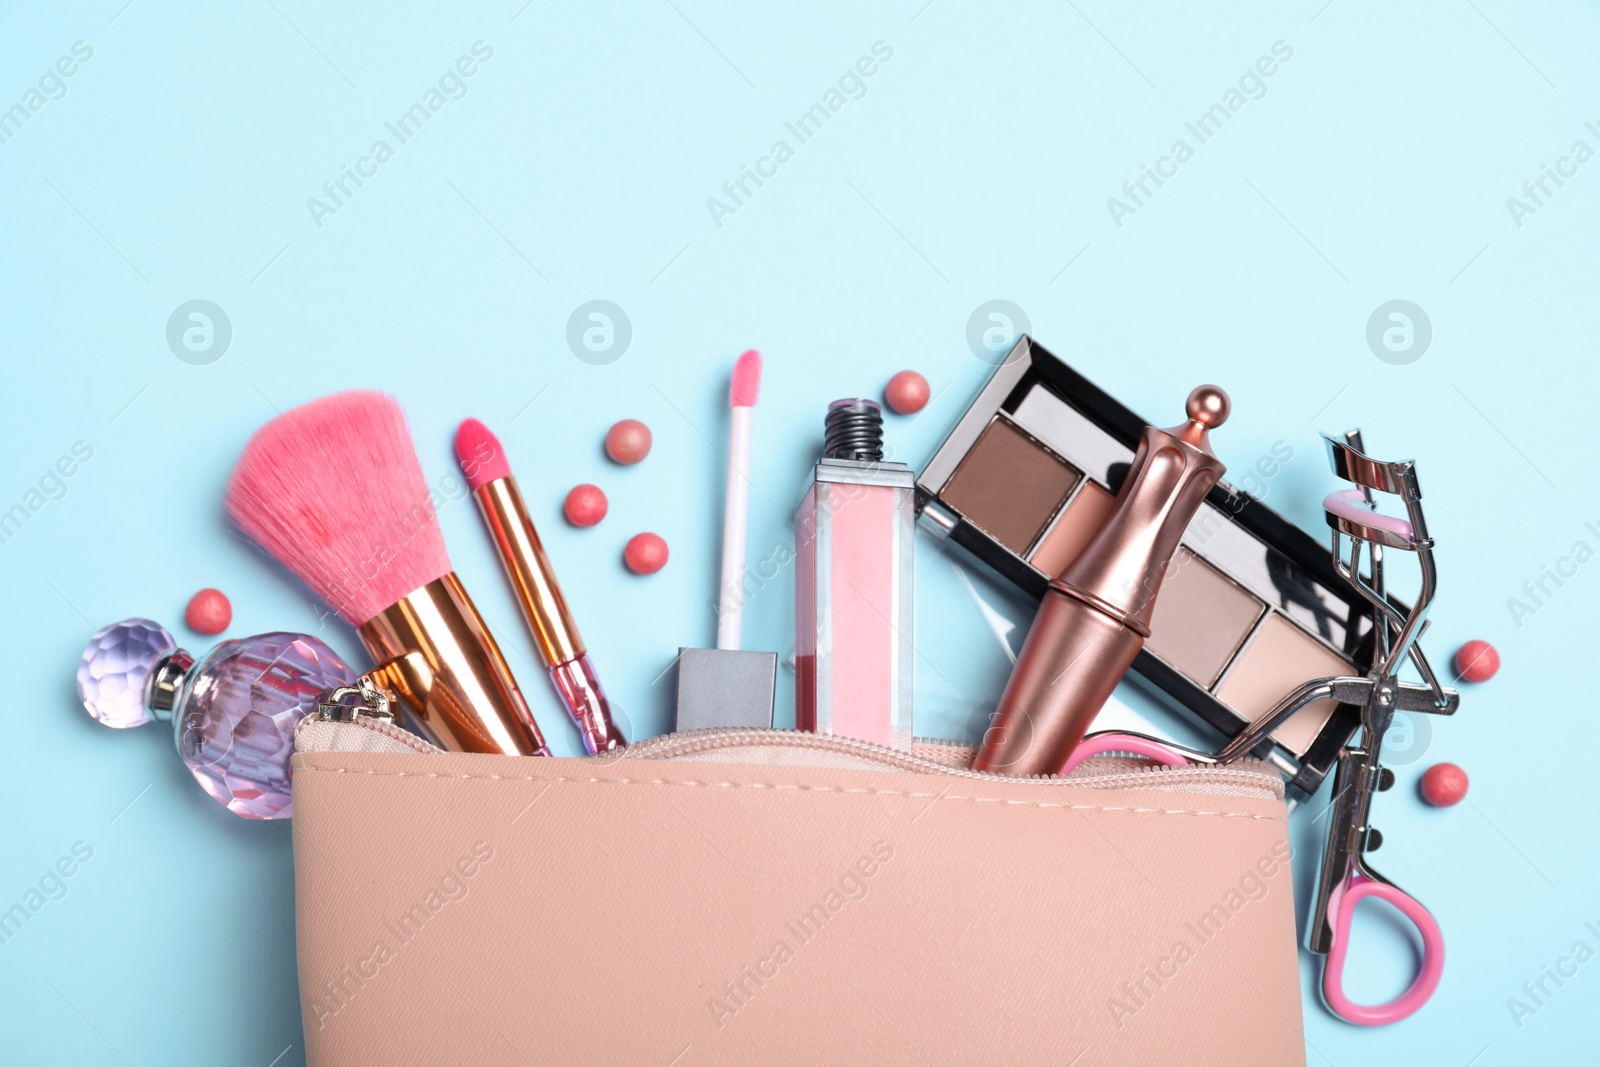 Photo of Cosmetic bag and makeup products with accessories on light blue background, flat lay